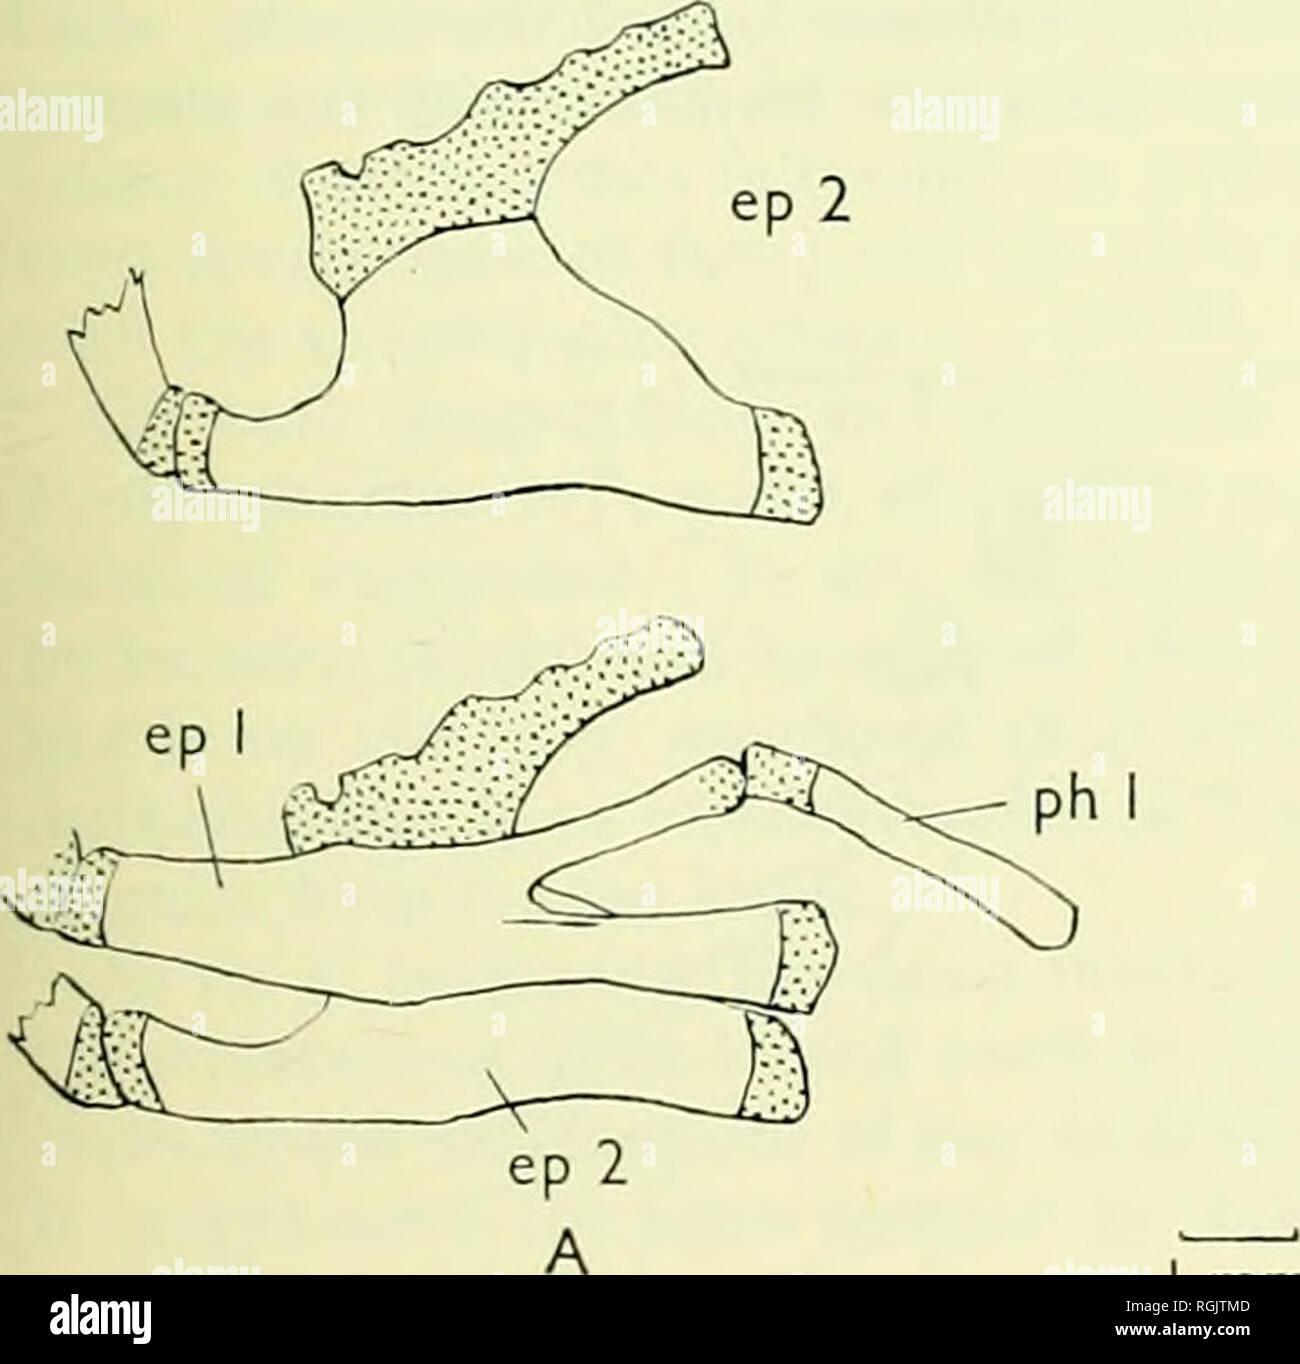 . Bulletin of the British Museum (Natural History). PELMATOCHROMIS, TILAPIA AND SAROTHERODON 17 in line with the changed dentition and presumably diet in adult T. busumana. It is a feature in which this species resembles Pelmatochromis more than other species of Tilapia. The epibranchial structures Glandular and sensory pads on the roof of the pharynx are present in most (all?) cichlids anterolaterally to the upper pharyngeal teeth. When Steindachner proposed the subgenus Pelmatochromis (Gr. pelma, gen. pelmato = the sole of the foot, referring to the shape of the pad) he included two species, Stock Photo